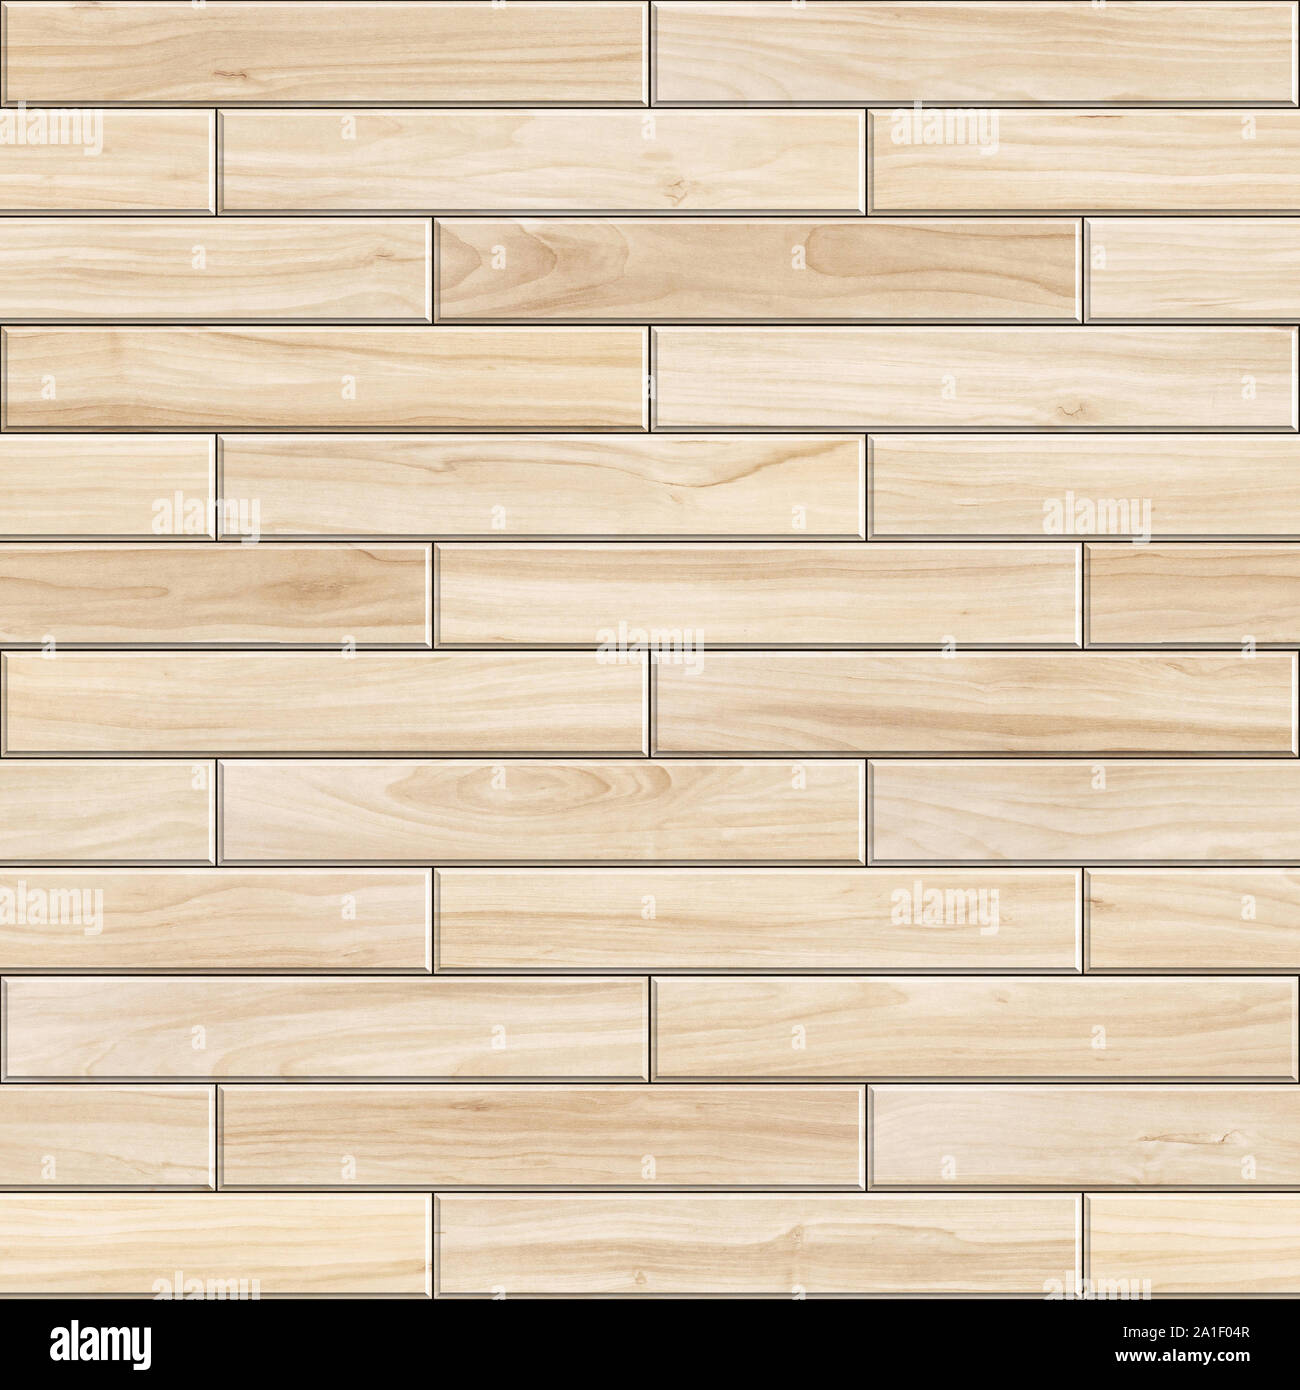 Seamless texture of striped wooden parquet. High resolution pattern of light wood Stock Photo